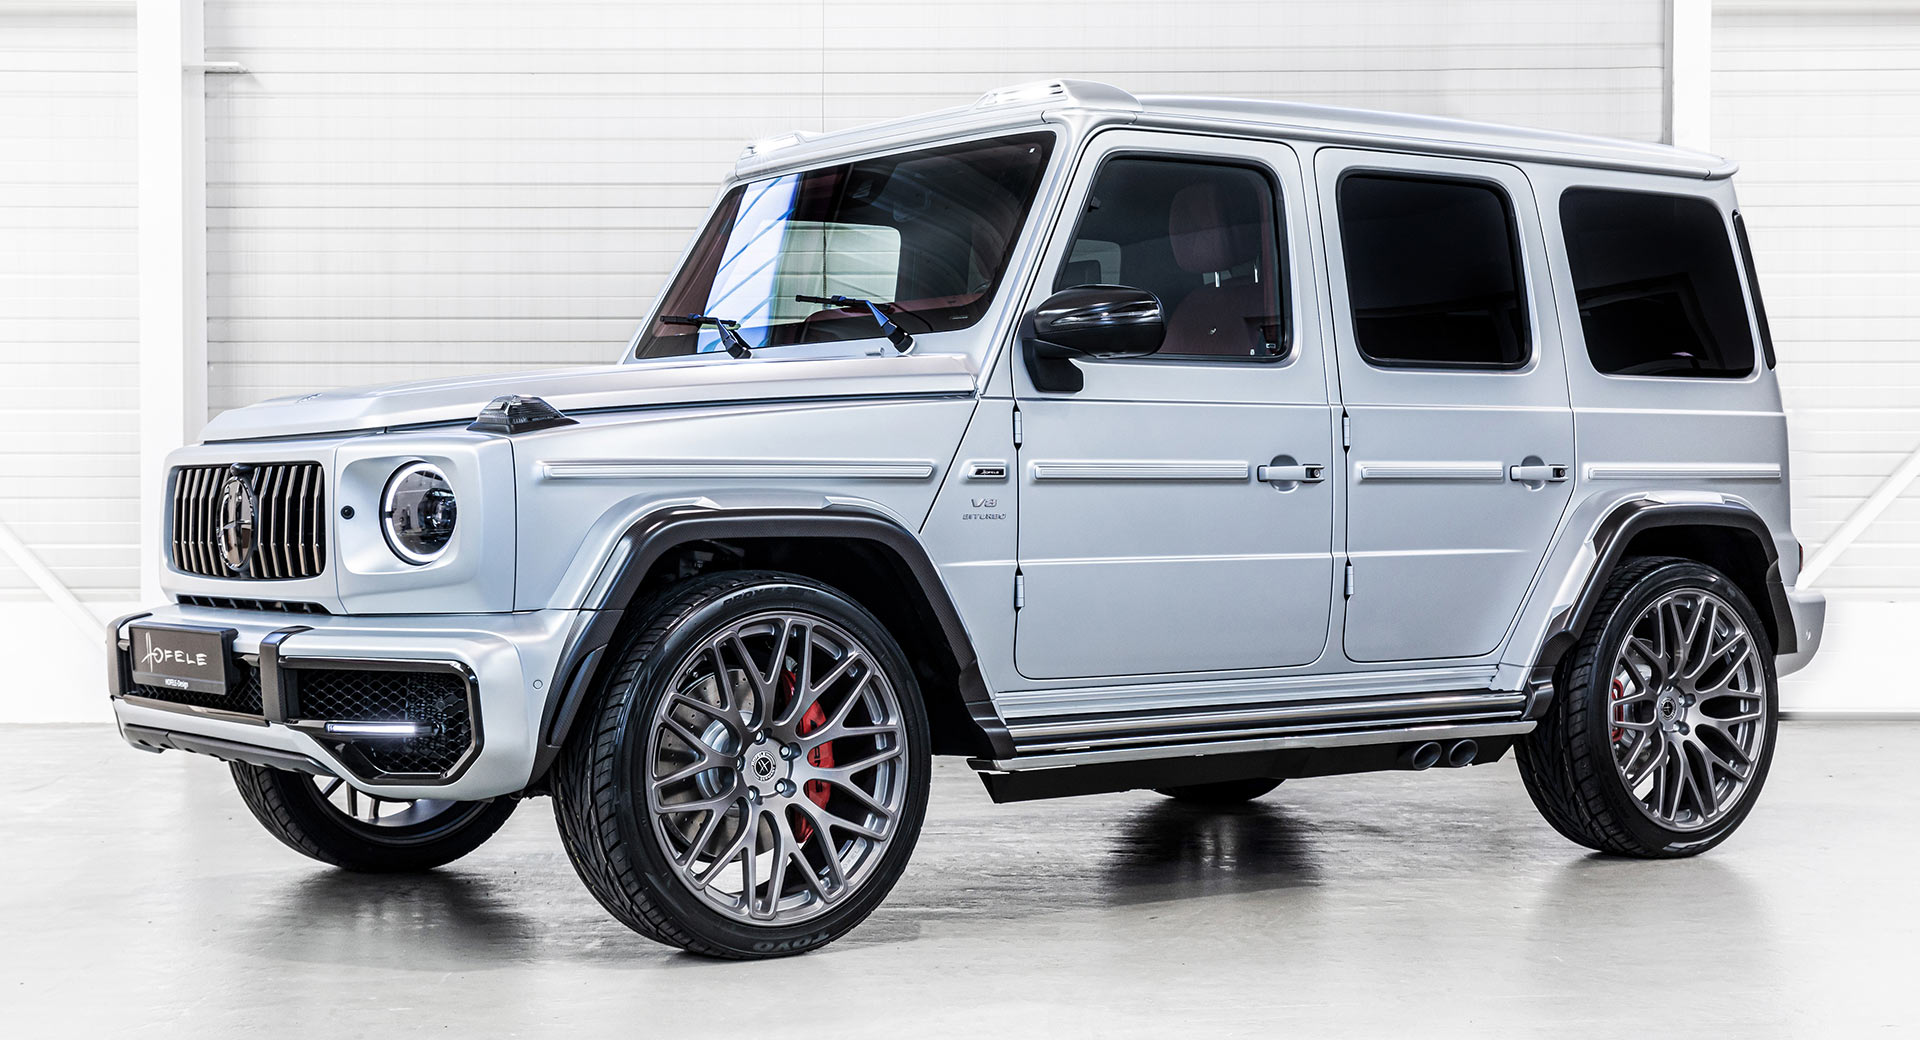 Hofele's 2021 HG 63 Is A Yet Another Take On The Mercedes-AMG G63 |  Carscoops